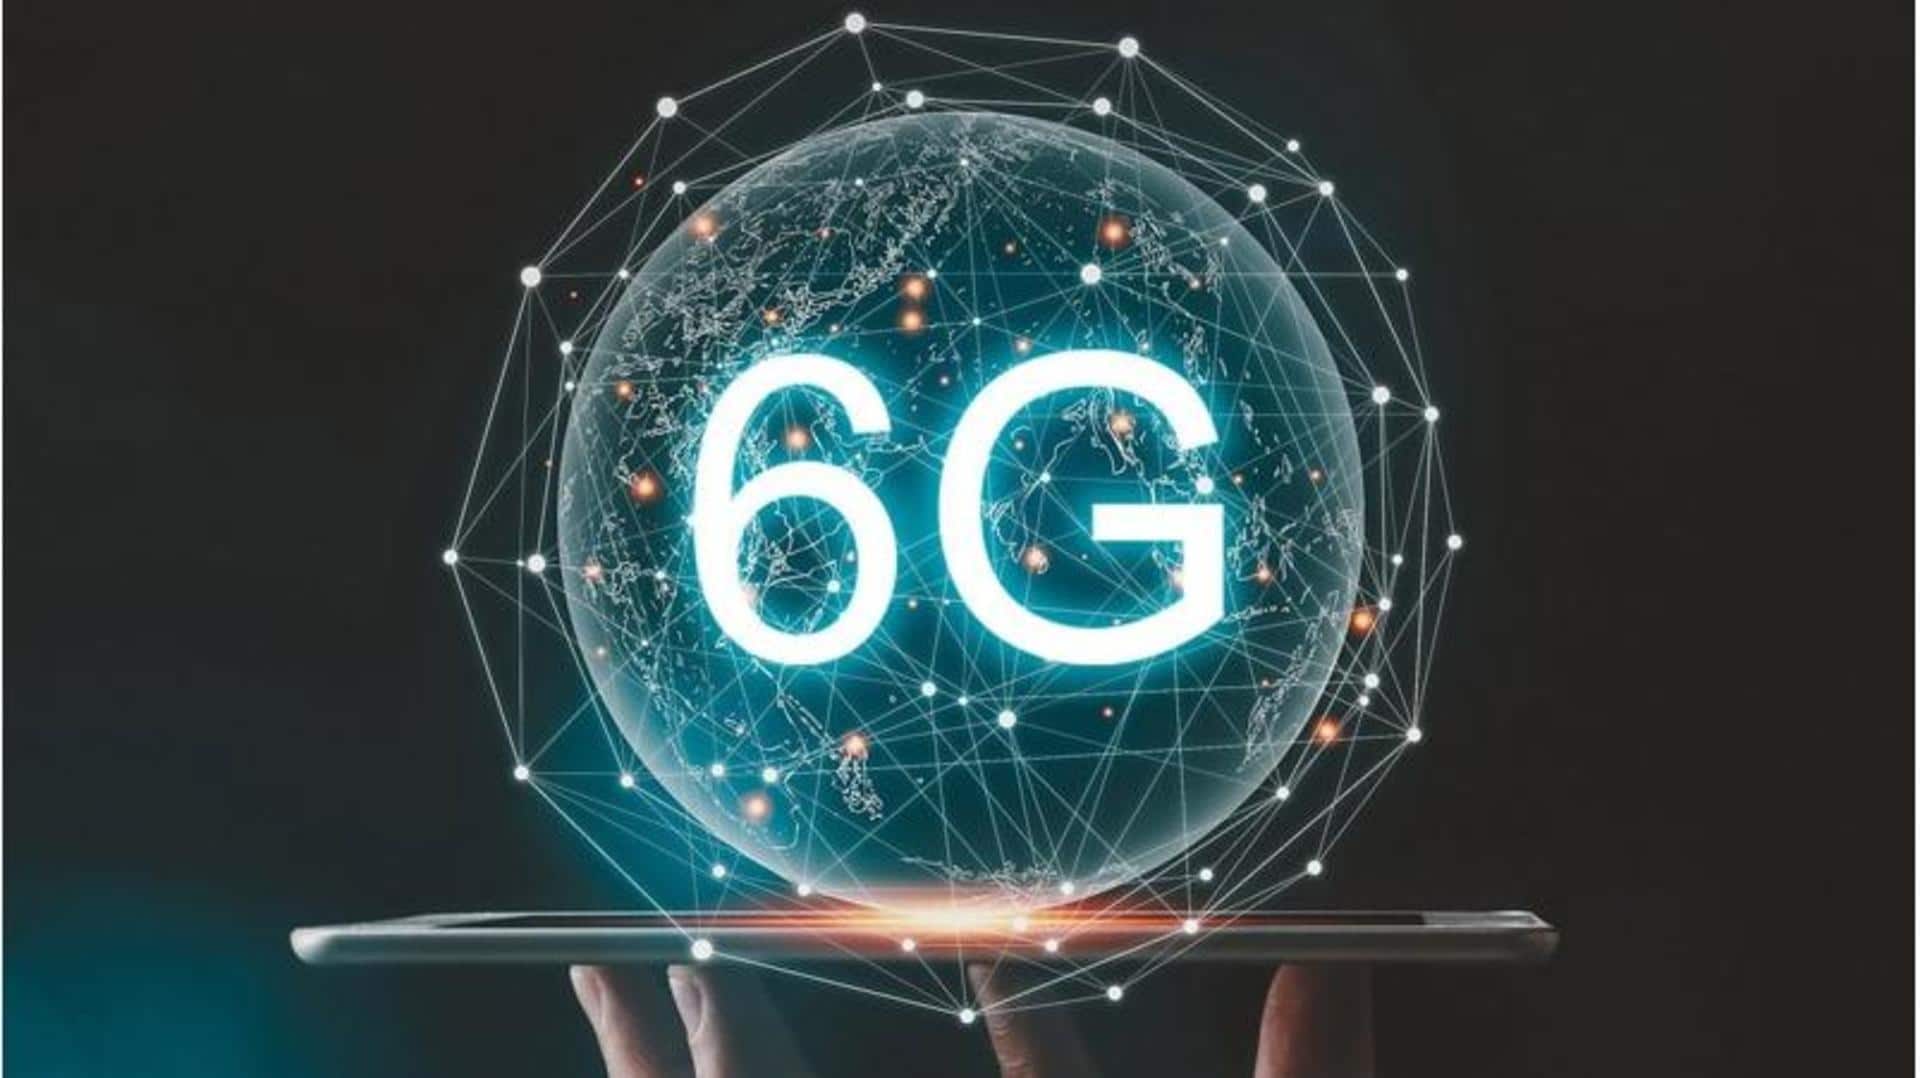 Forget 5G, this country is working on 6G technology